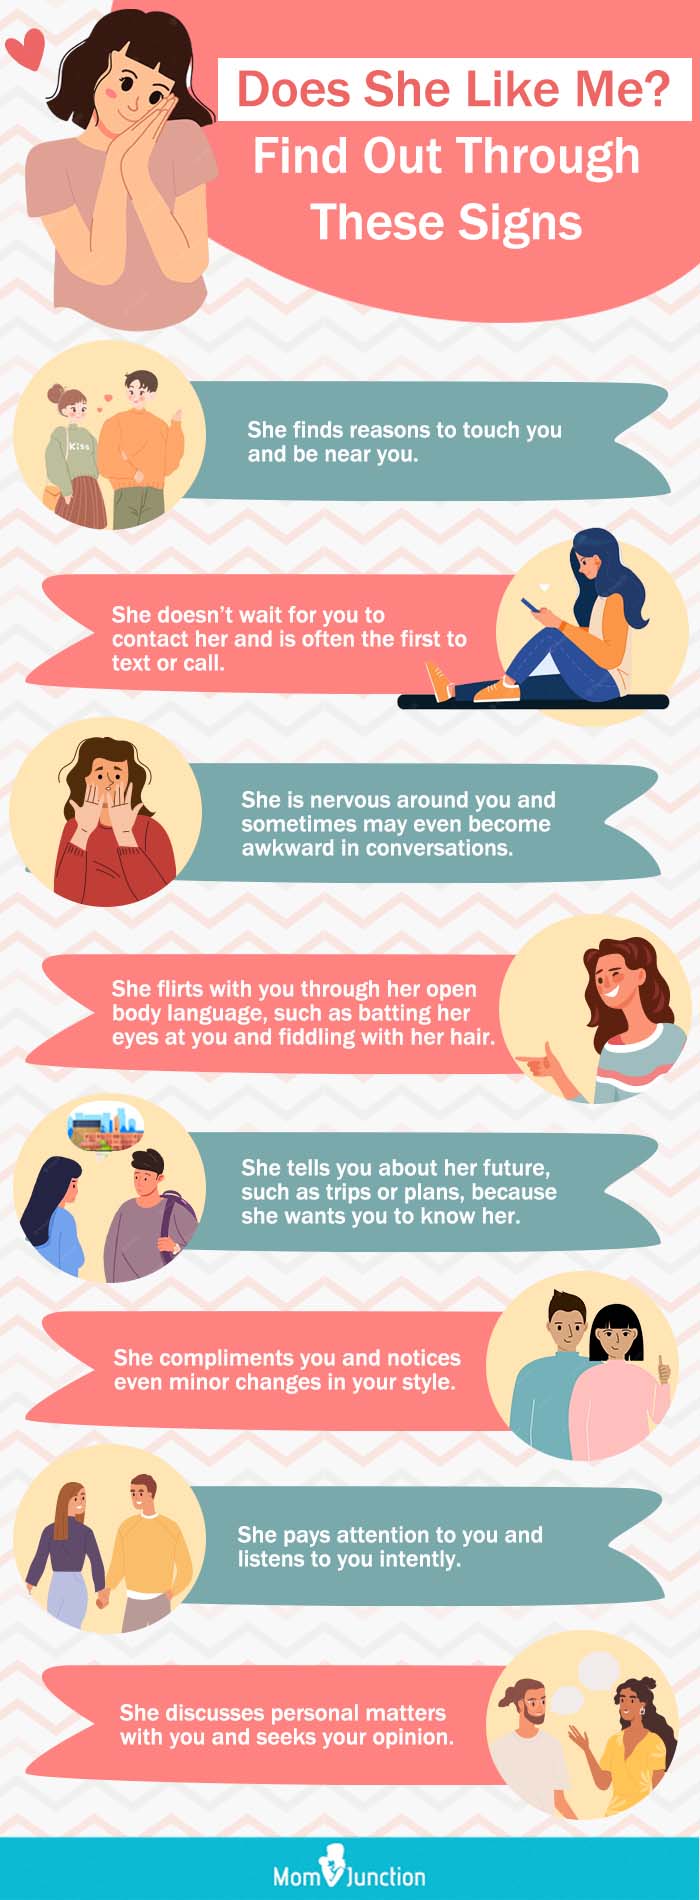 15+ Telltale Signs She Is Developing Feelings For You